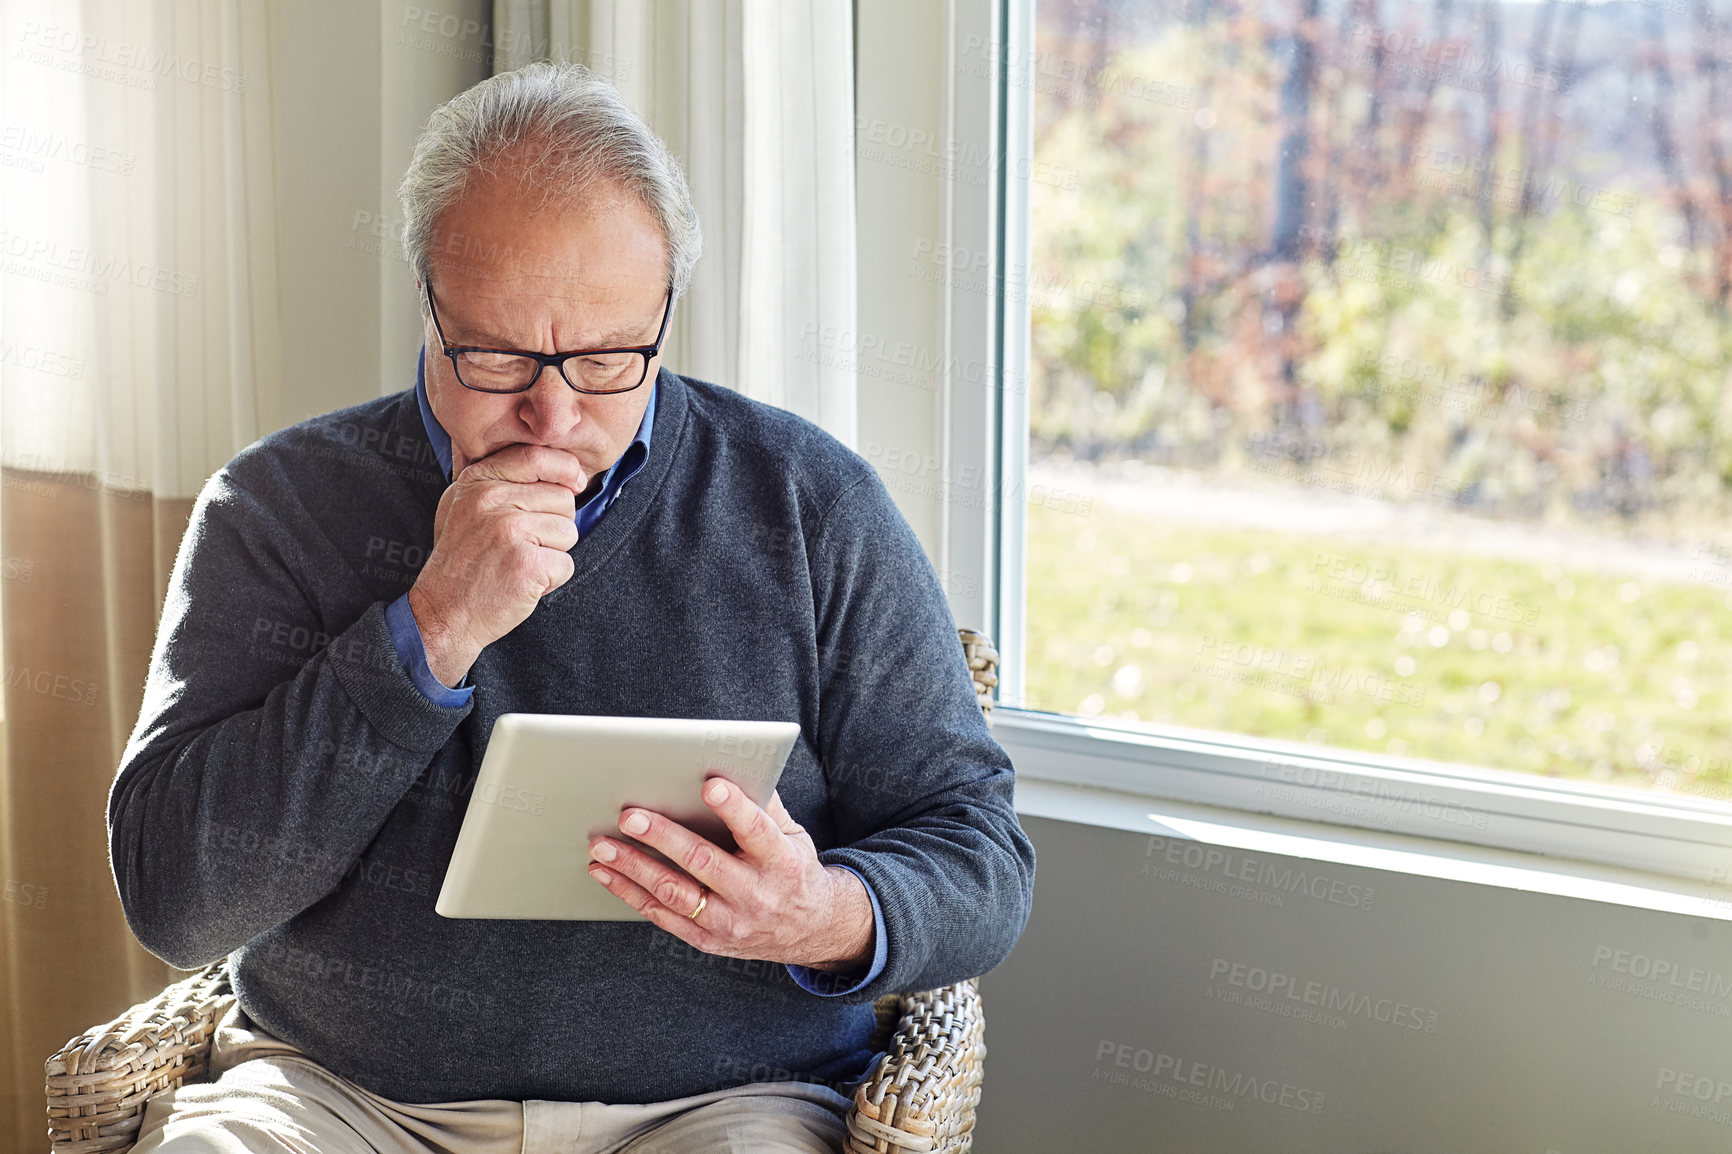 Buy stock photo Cropped shot of a senior man using a tablet at home